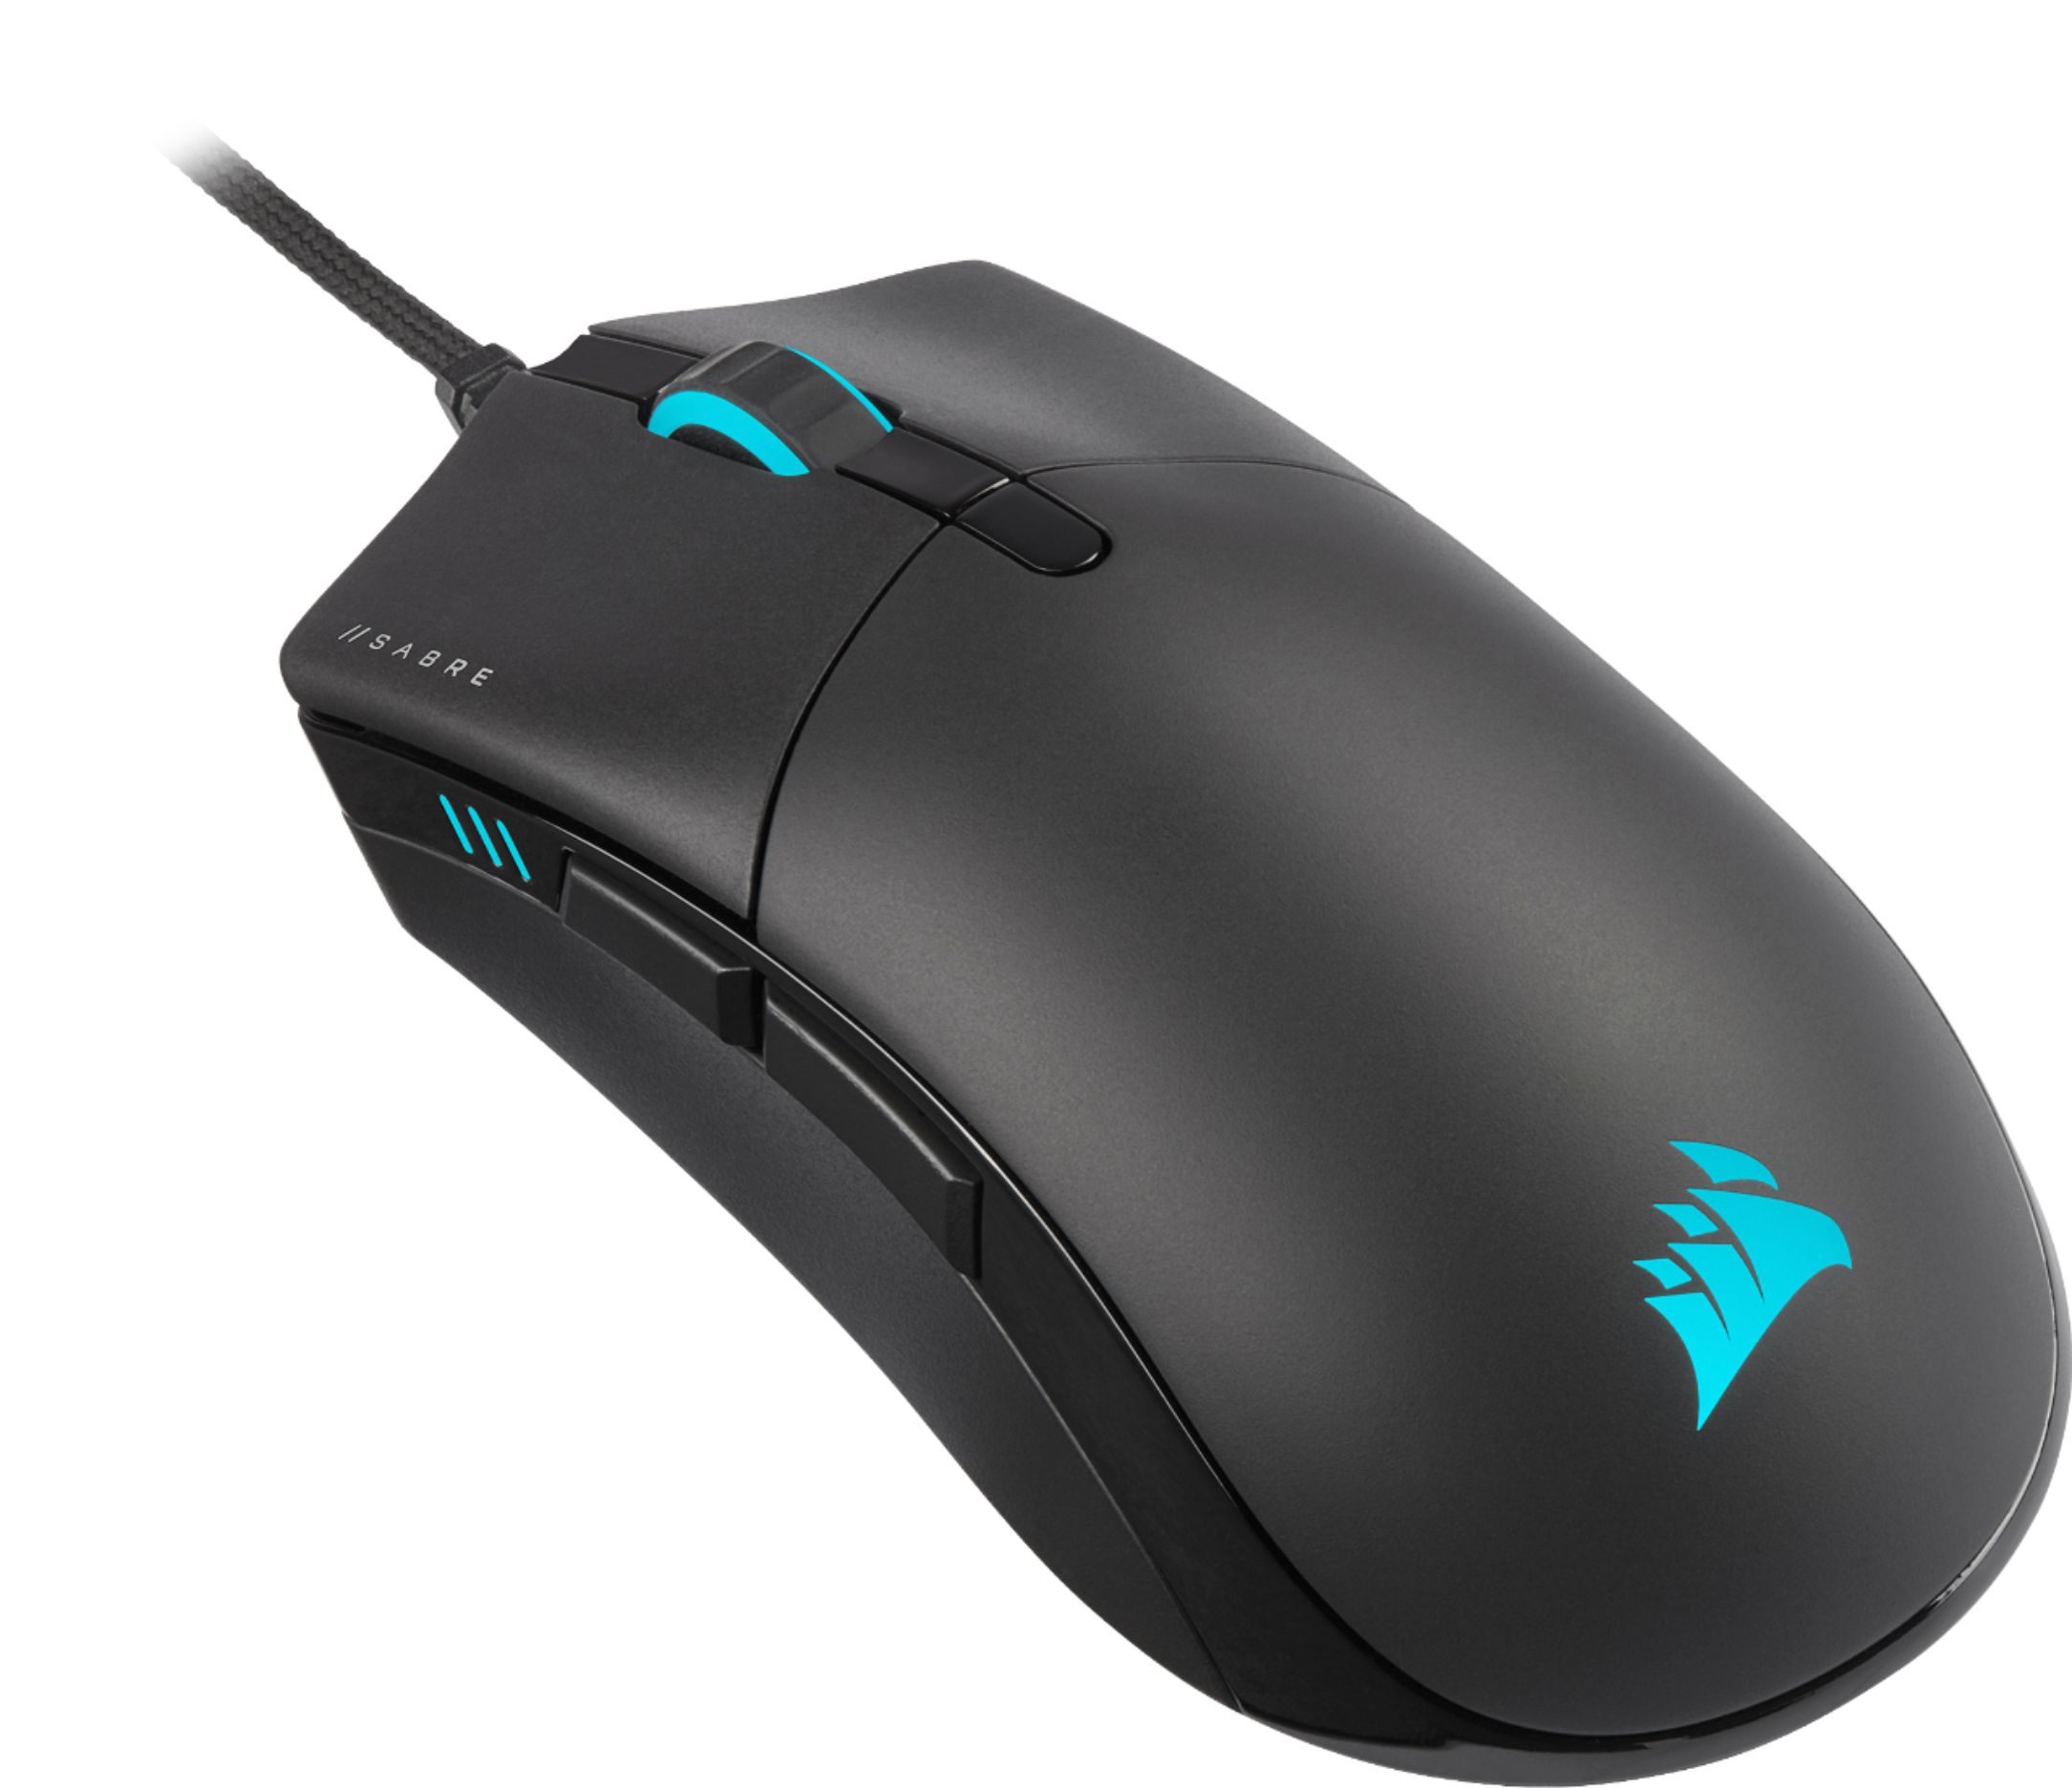 Angle View: CORSAIR - CHAMPION SERIES SABRE RGB PRO Lightweight Wired Optical Gaming Mouse with 69g Ultra-lightweight design - Black